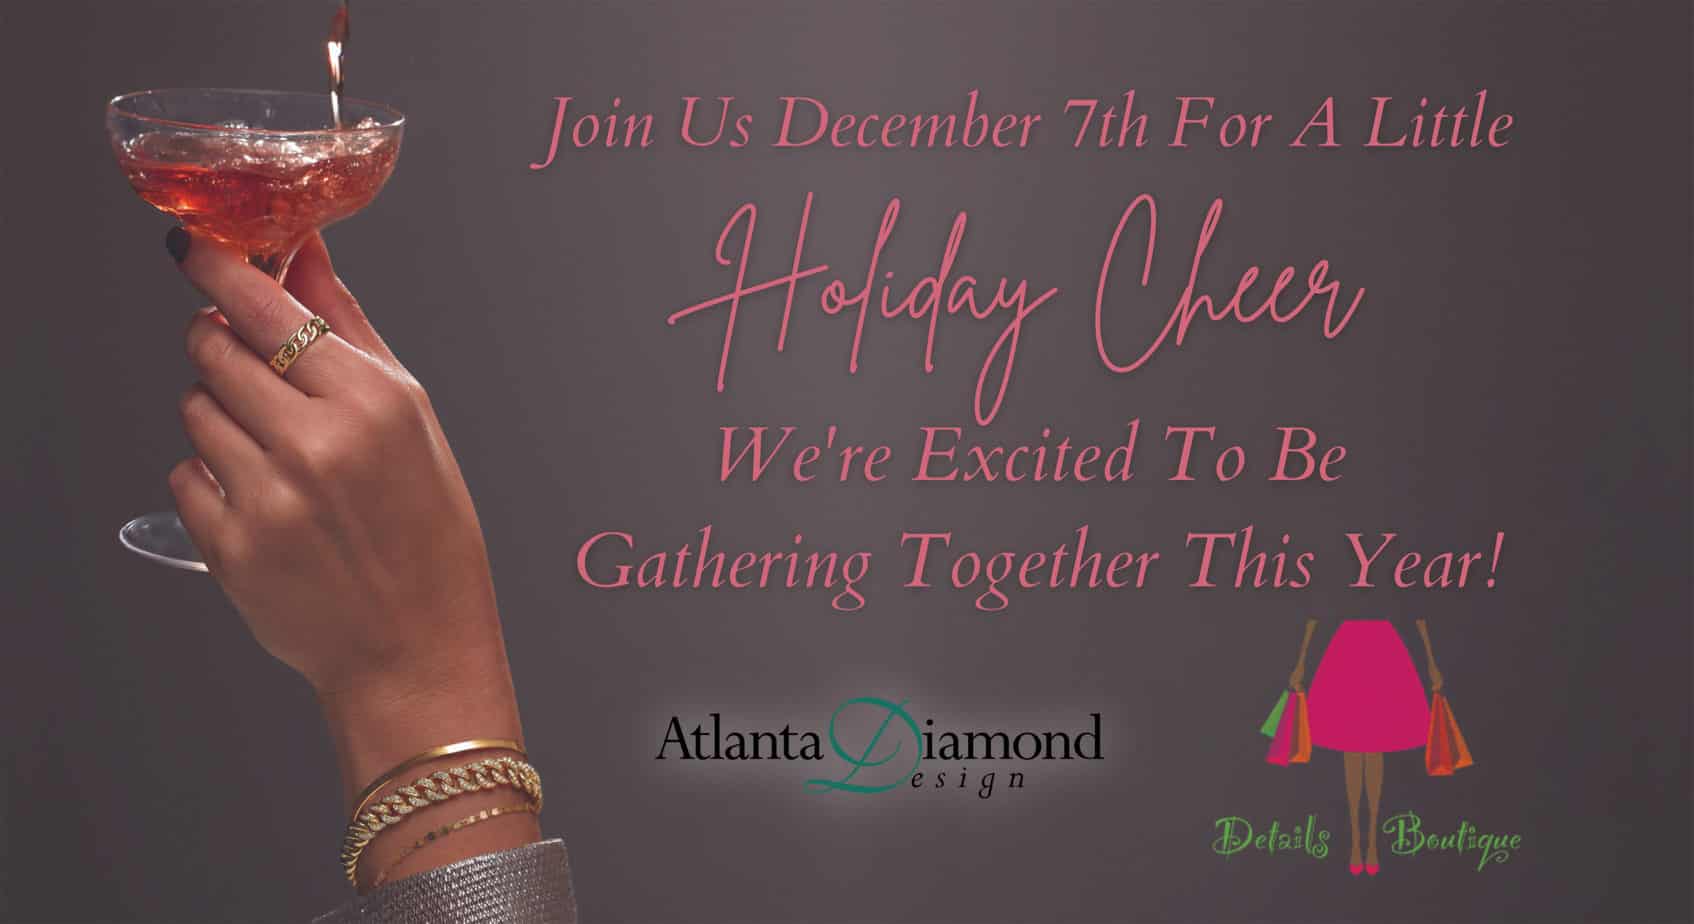 Join us for Holiday Cheer